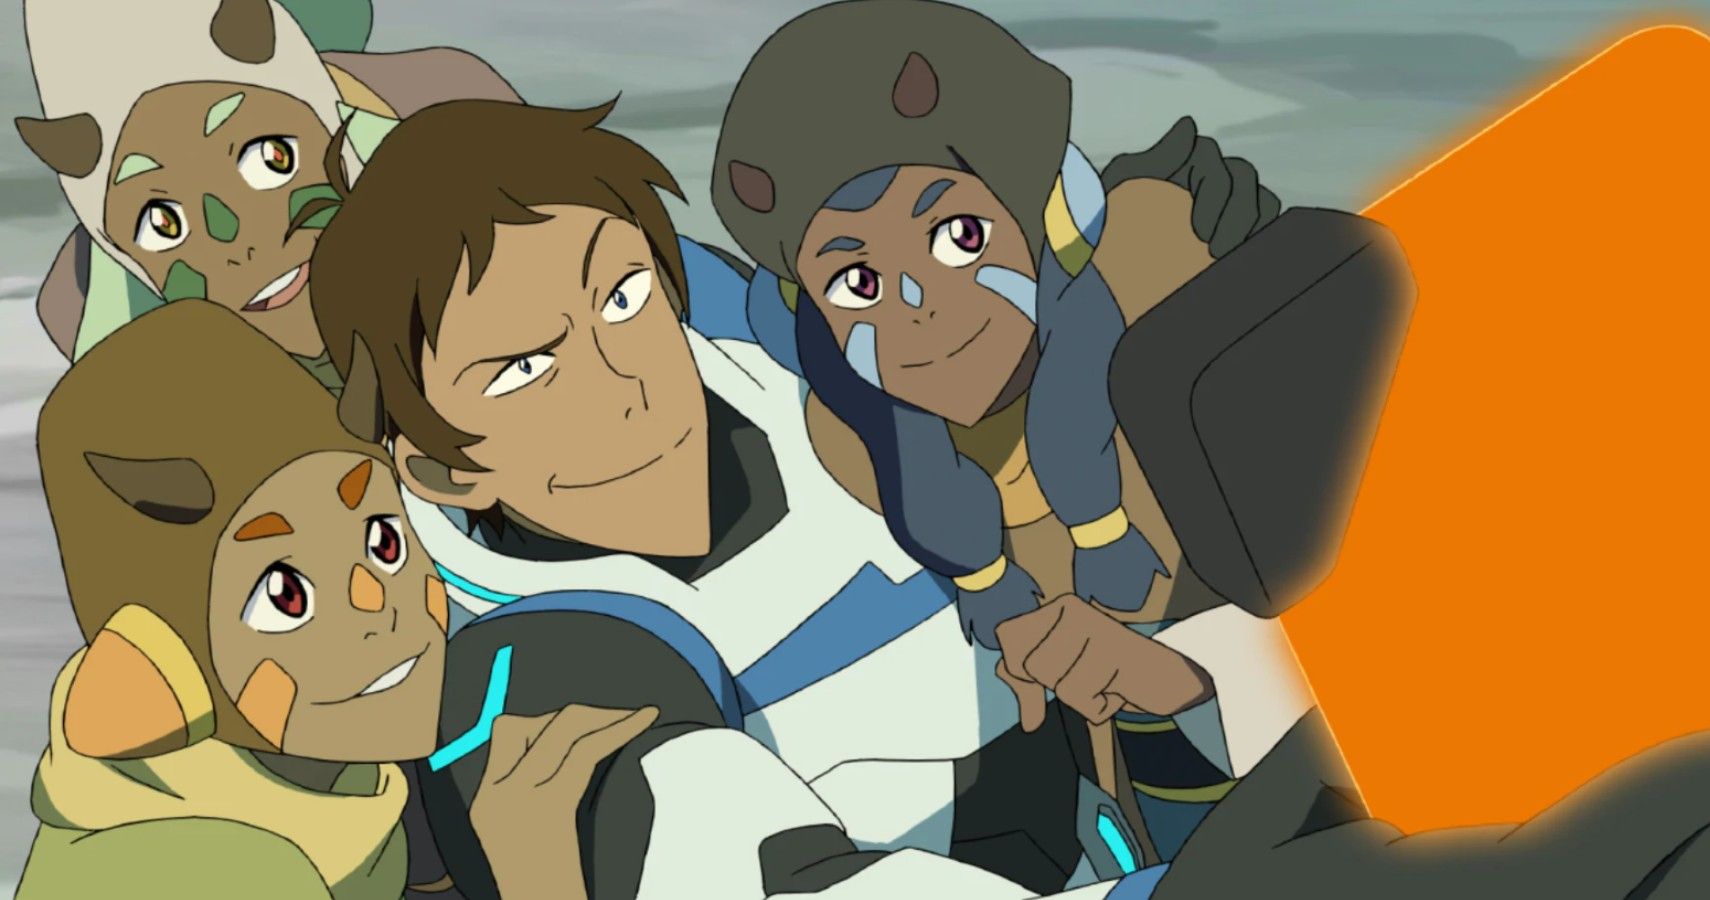 Voltron Legendary Defender 10 Questions About Lance McClain Answered